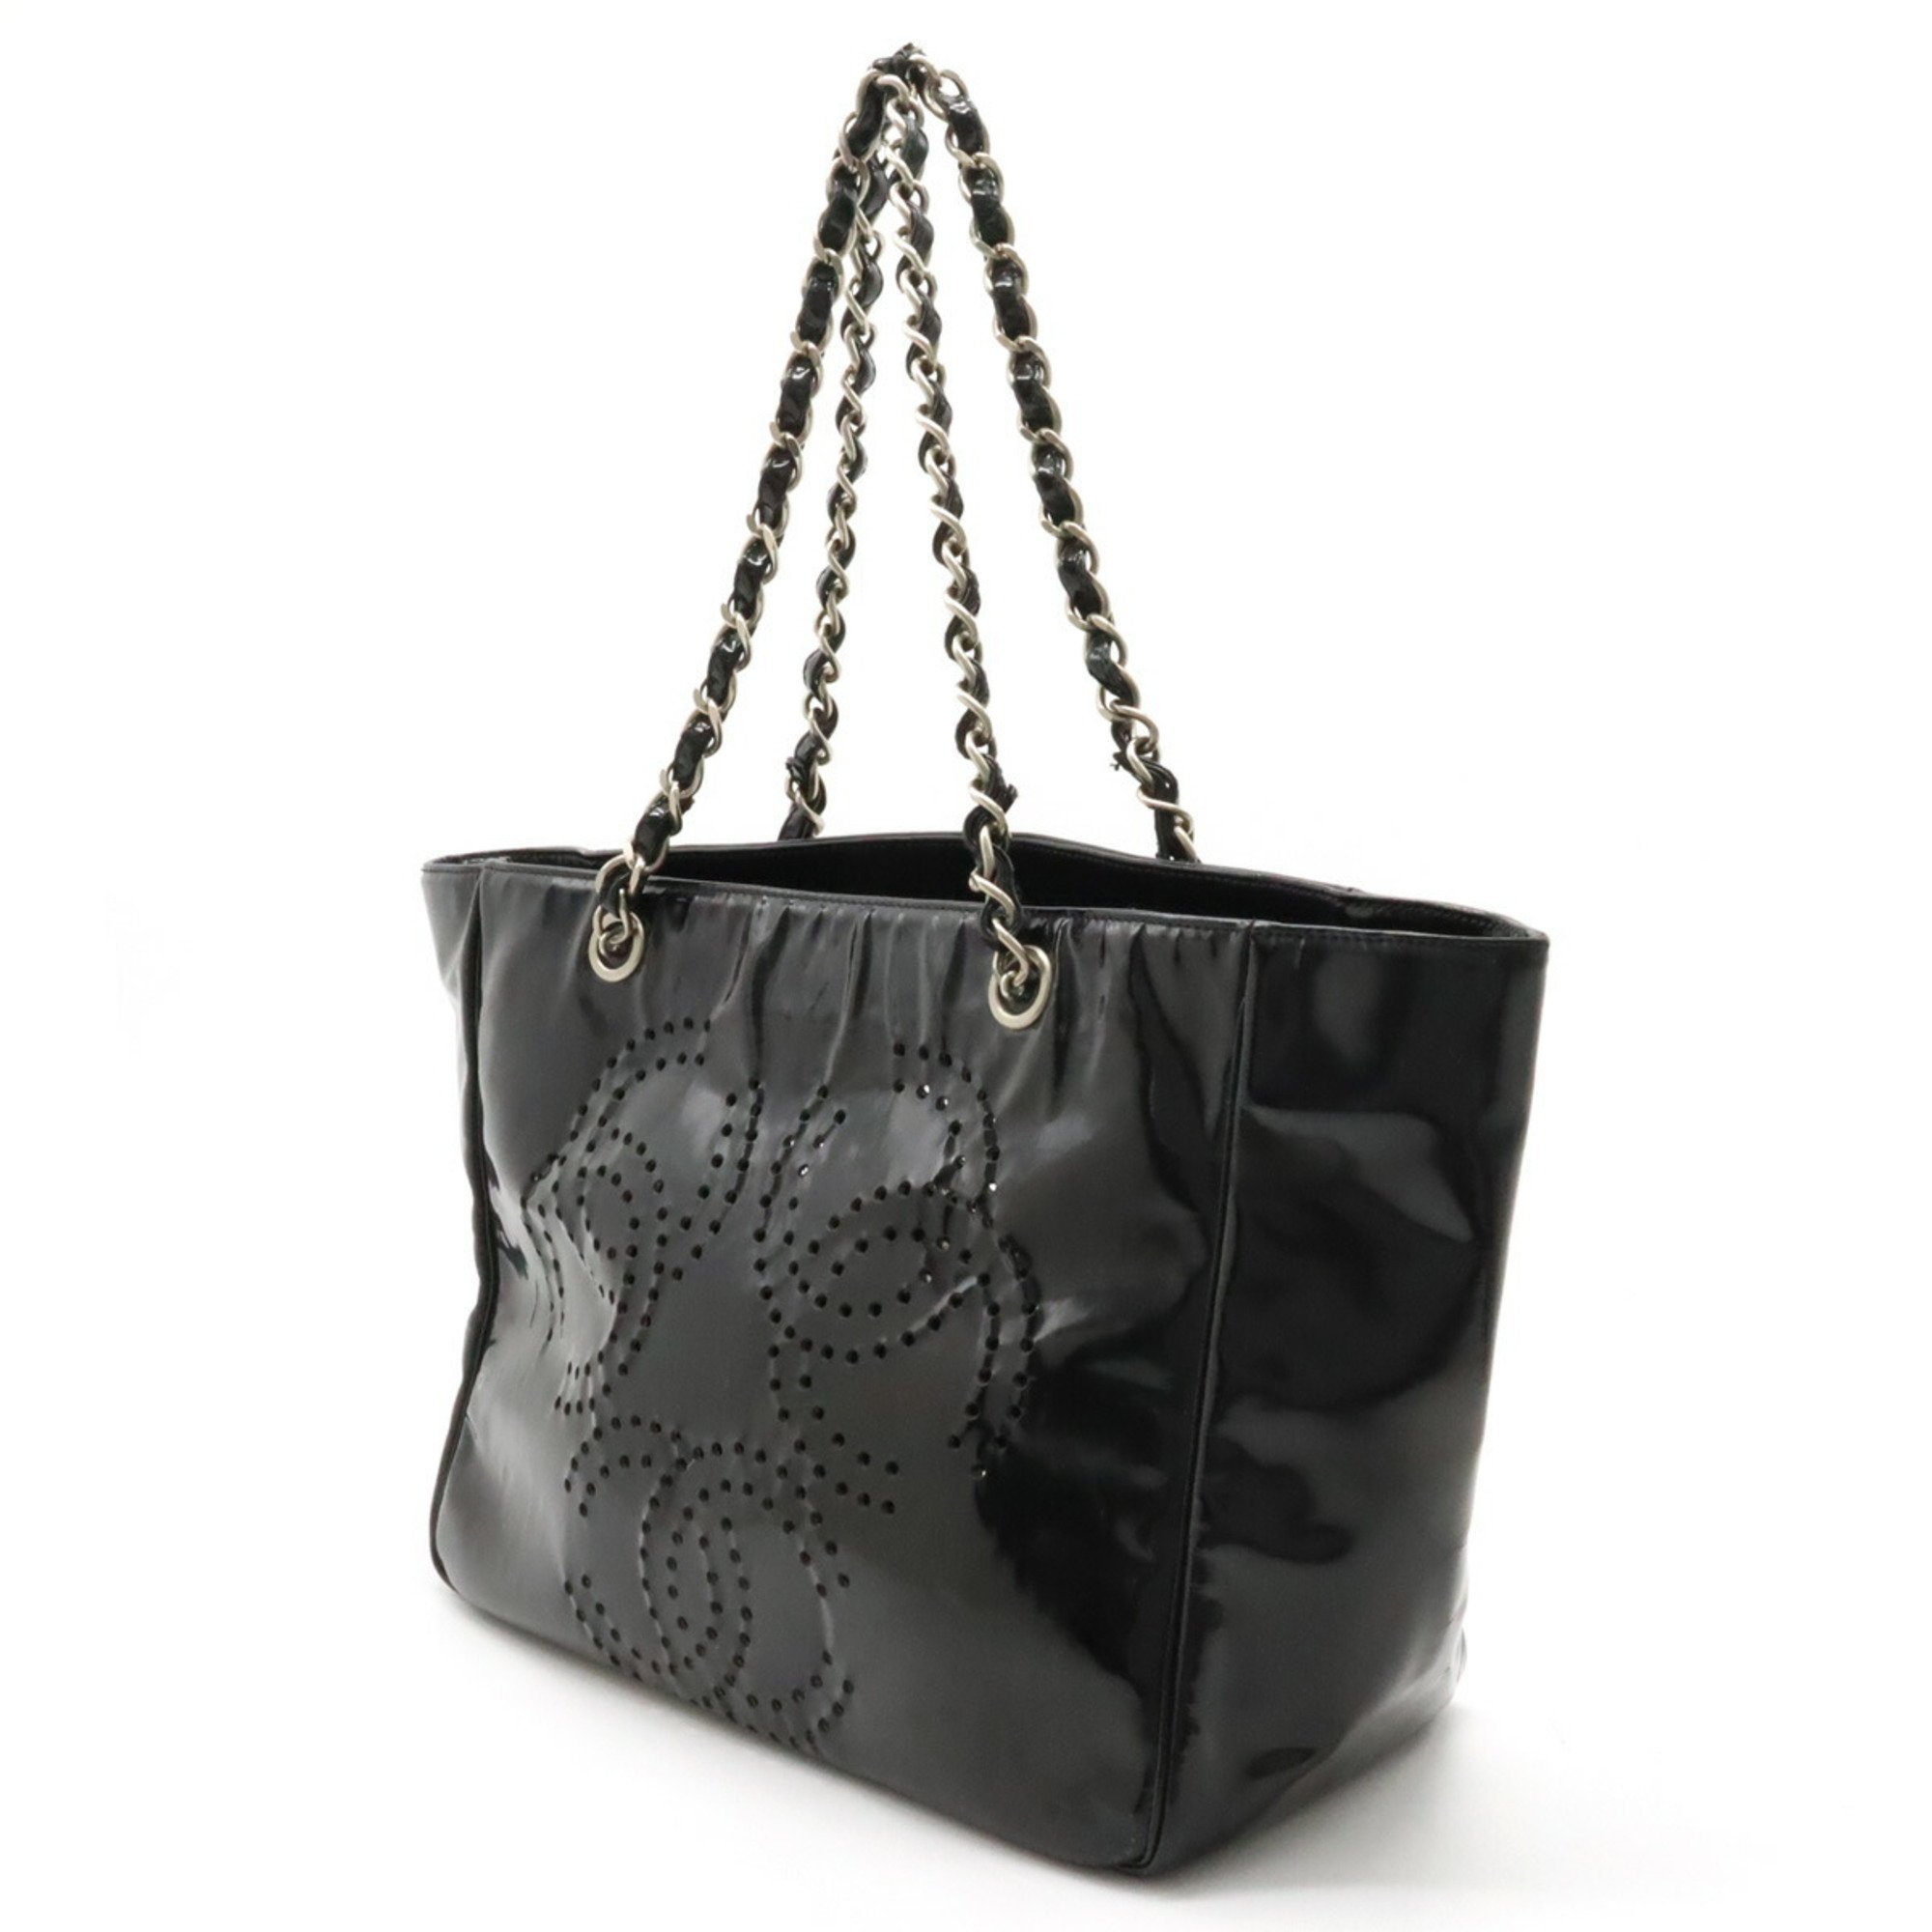 CHANEL Coco Mark Triple Punching Chain Shoulder Bag Tote Enamel Black Pouch Not Included A16275